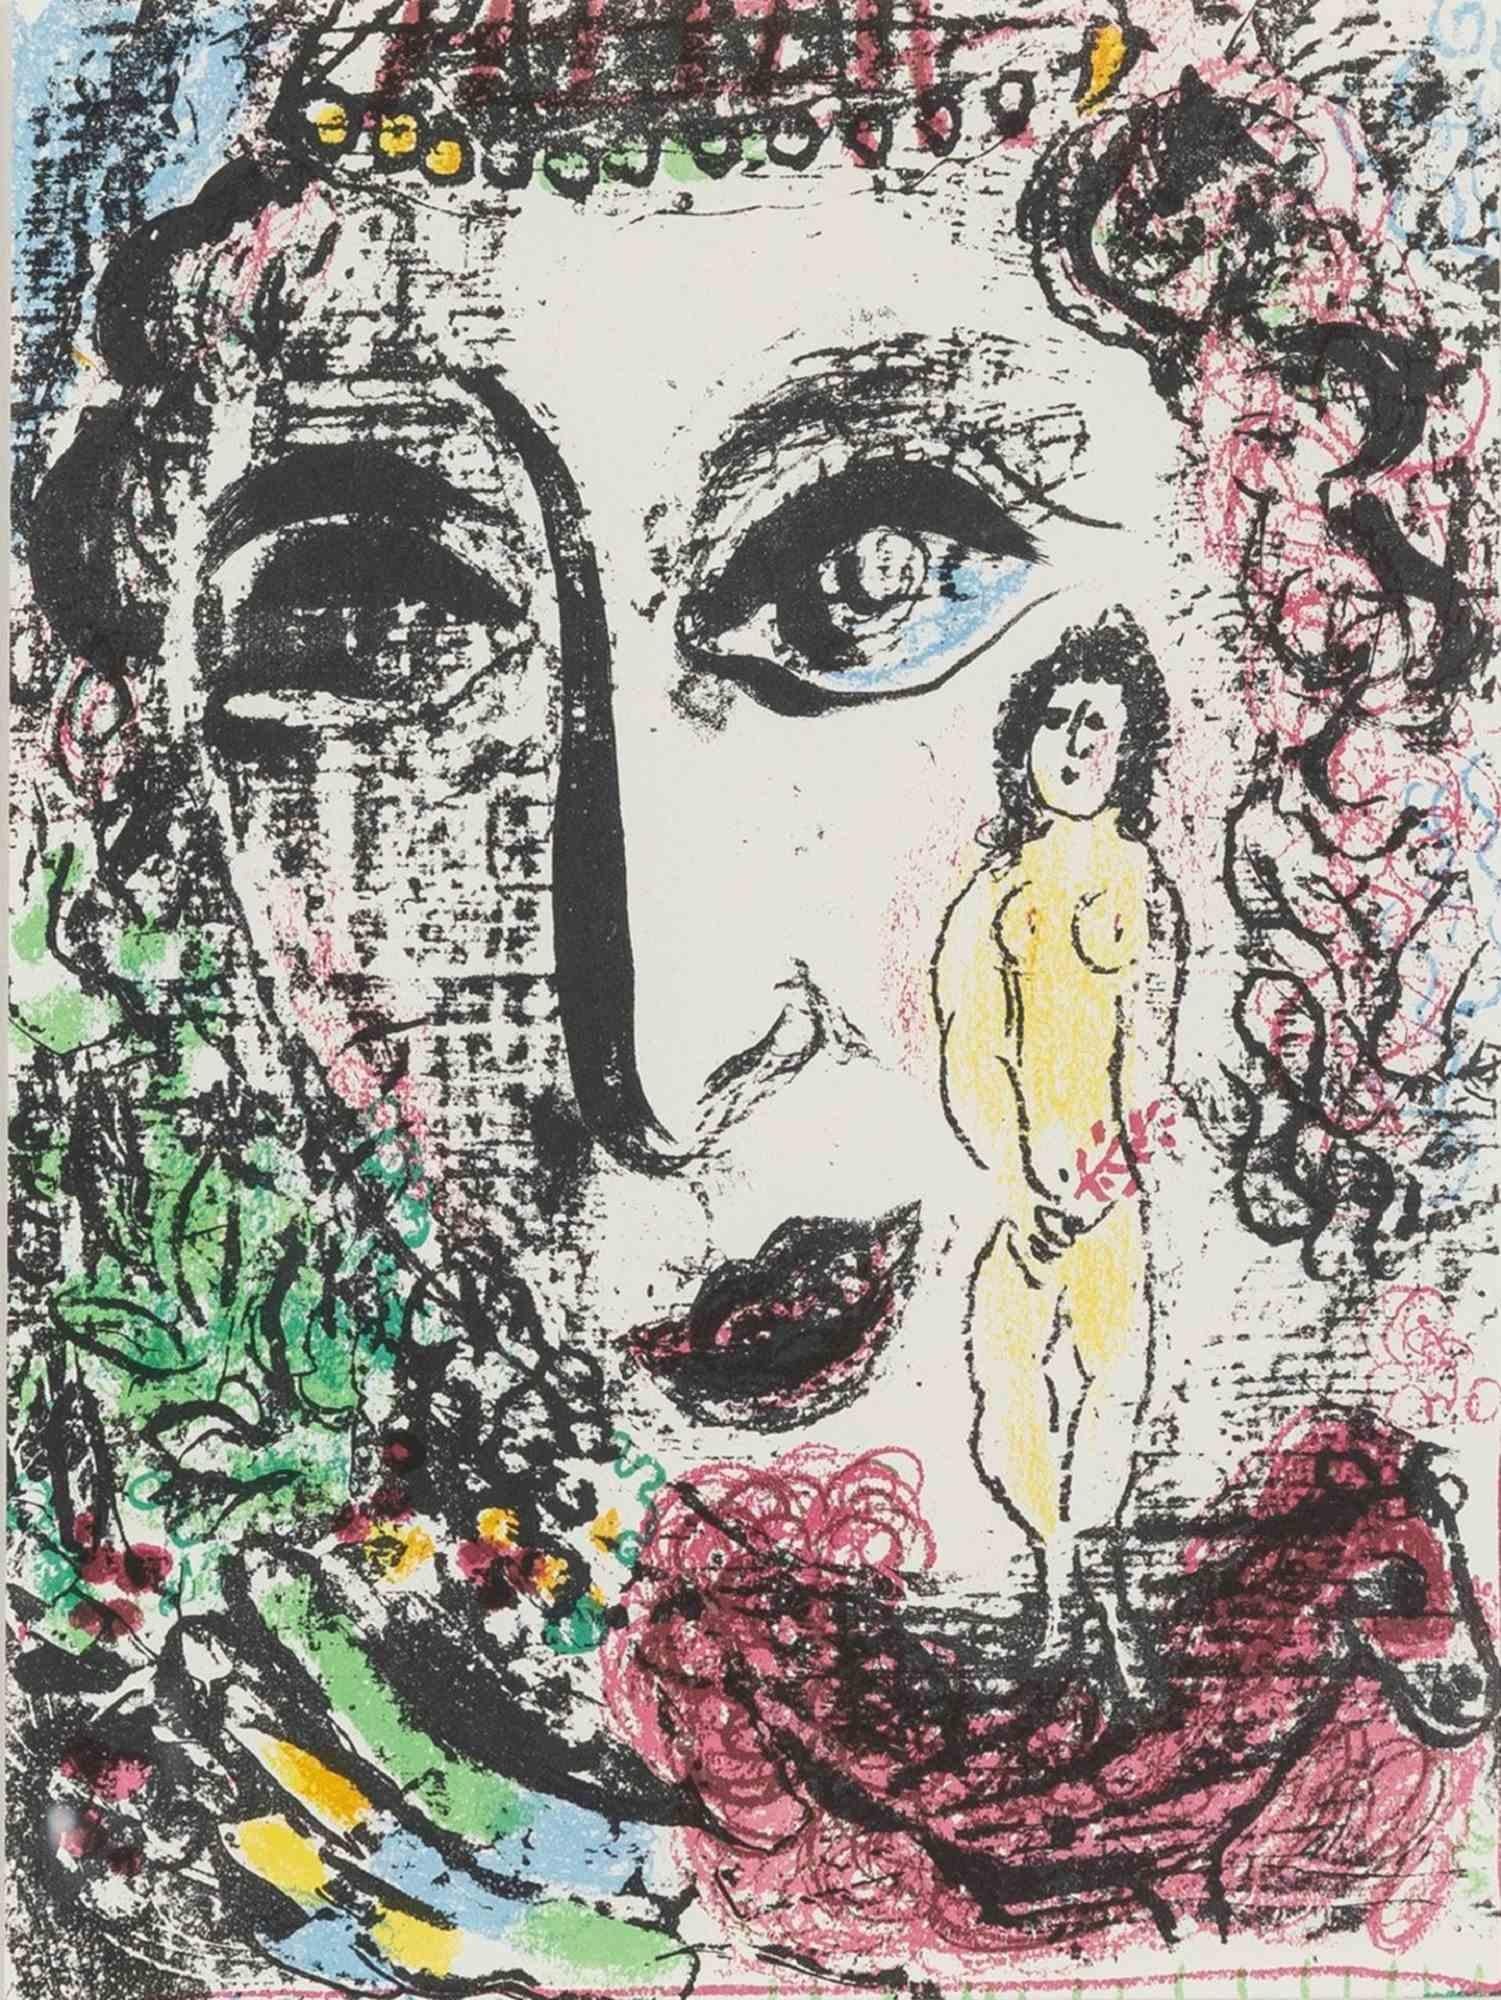 Performing in the Circus – Lithographie von Marc Chagall – 1960er Jahre